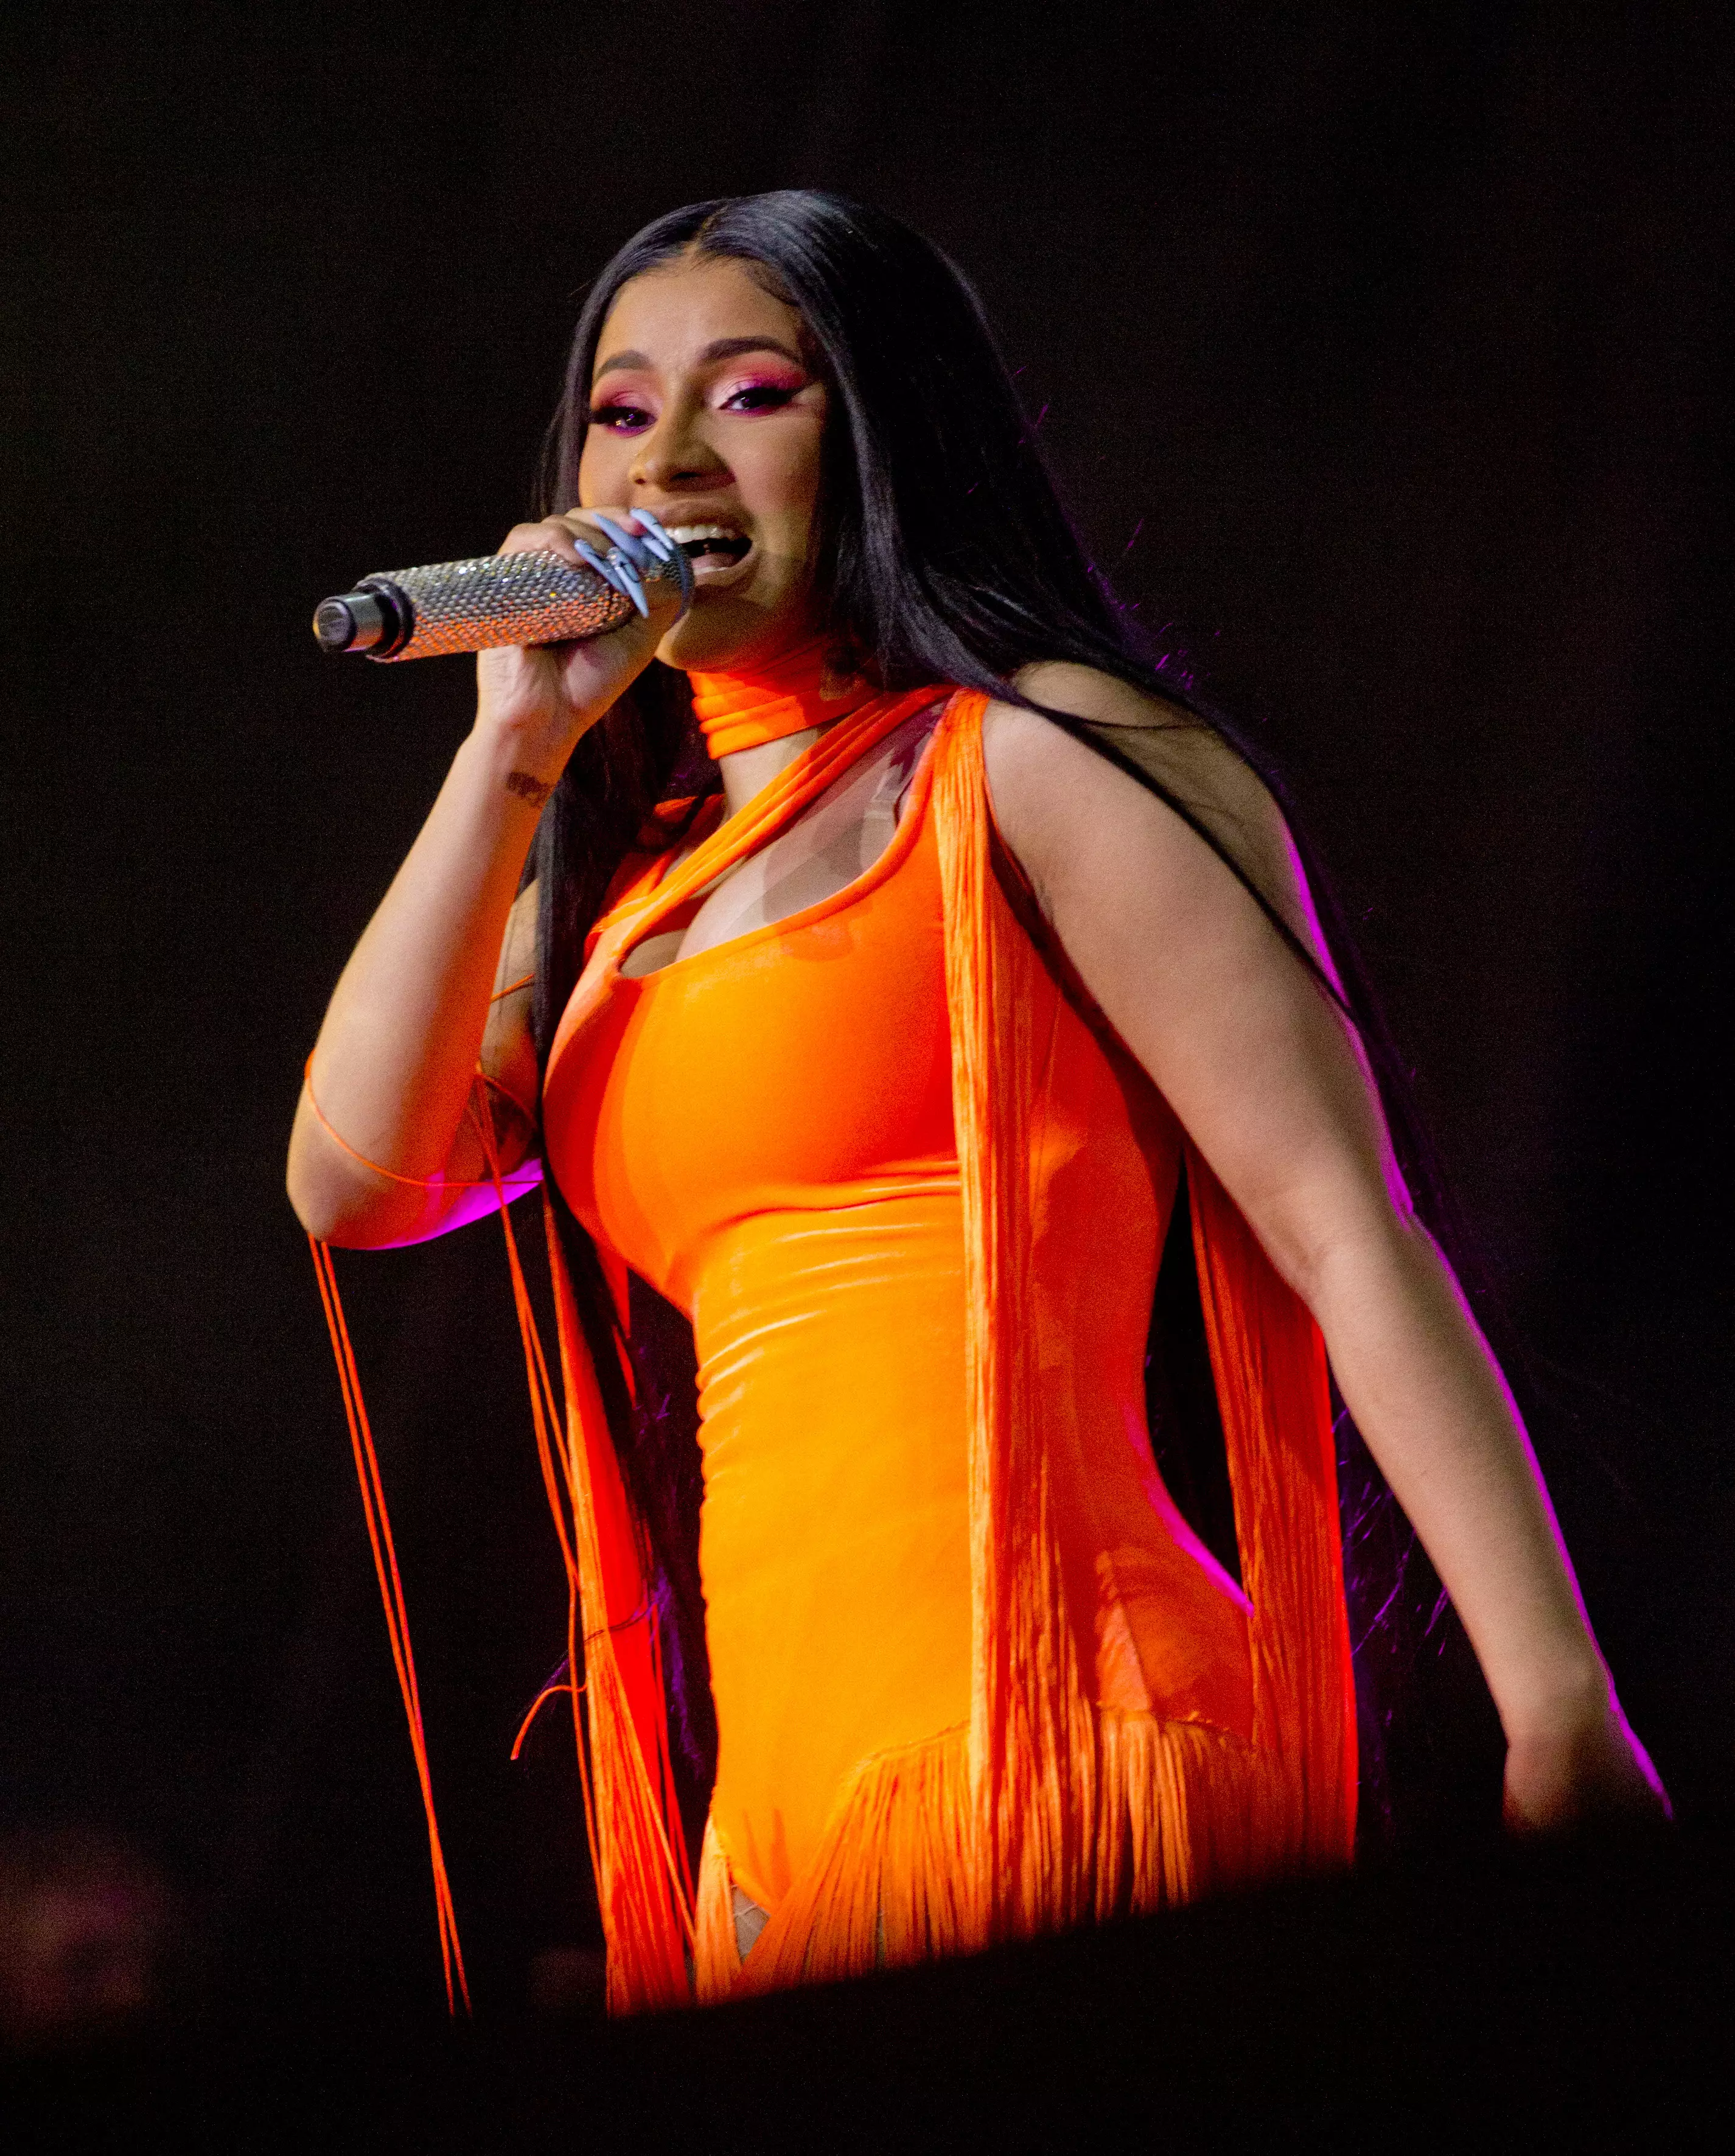 Cardi B has voiced her disapproval for Peppa Pig (